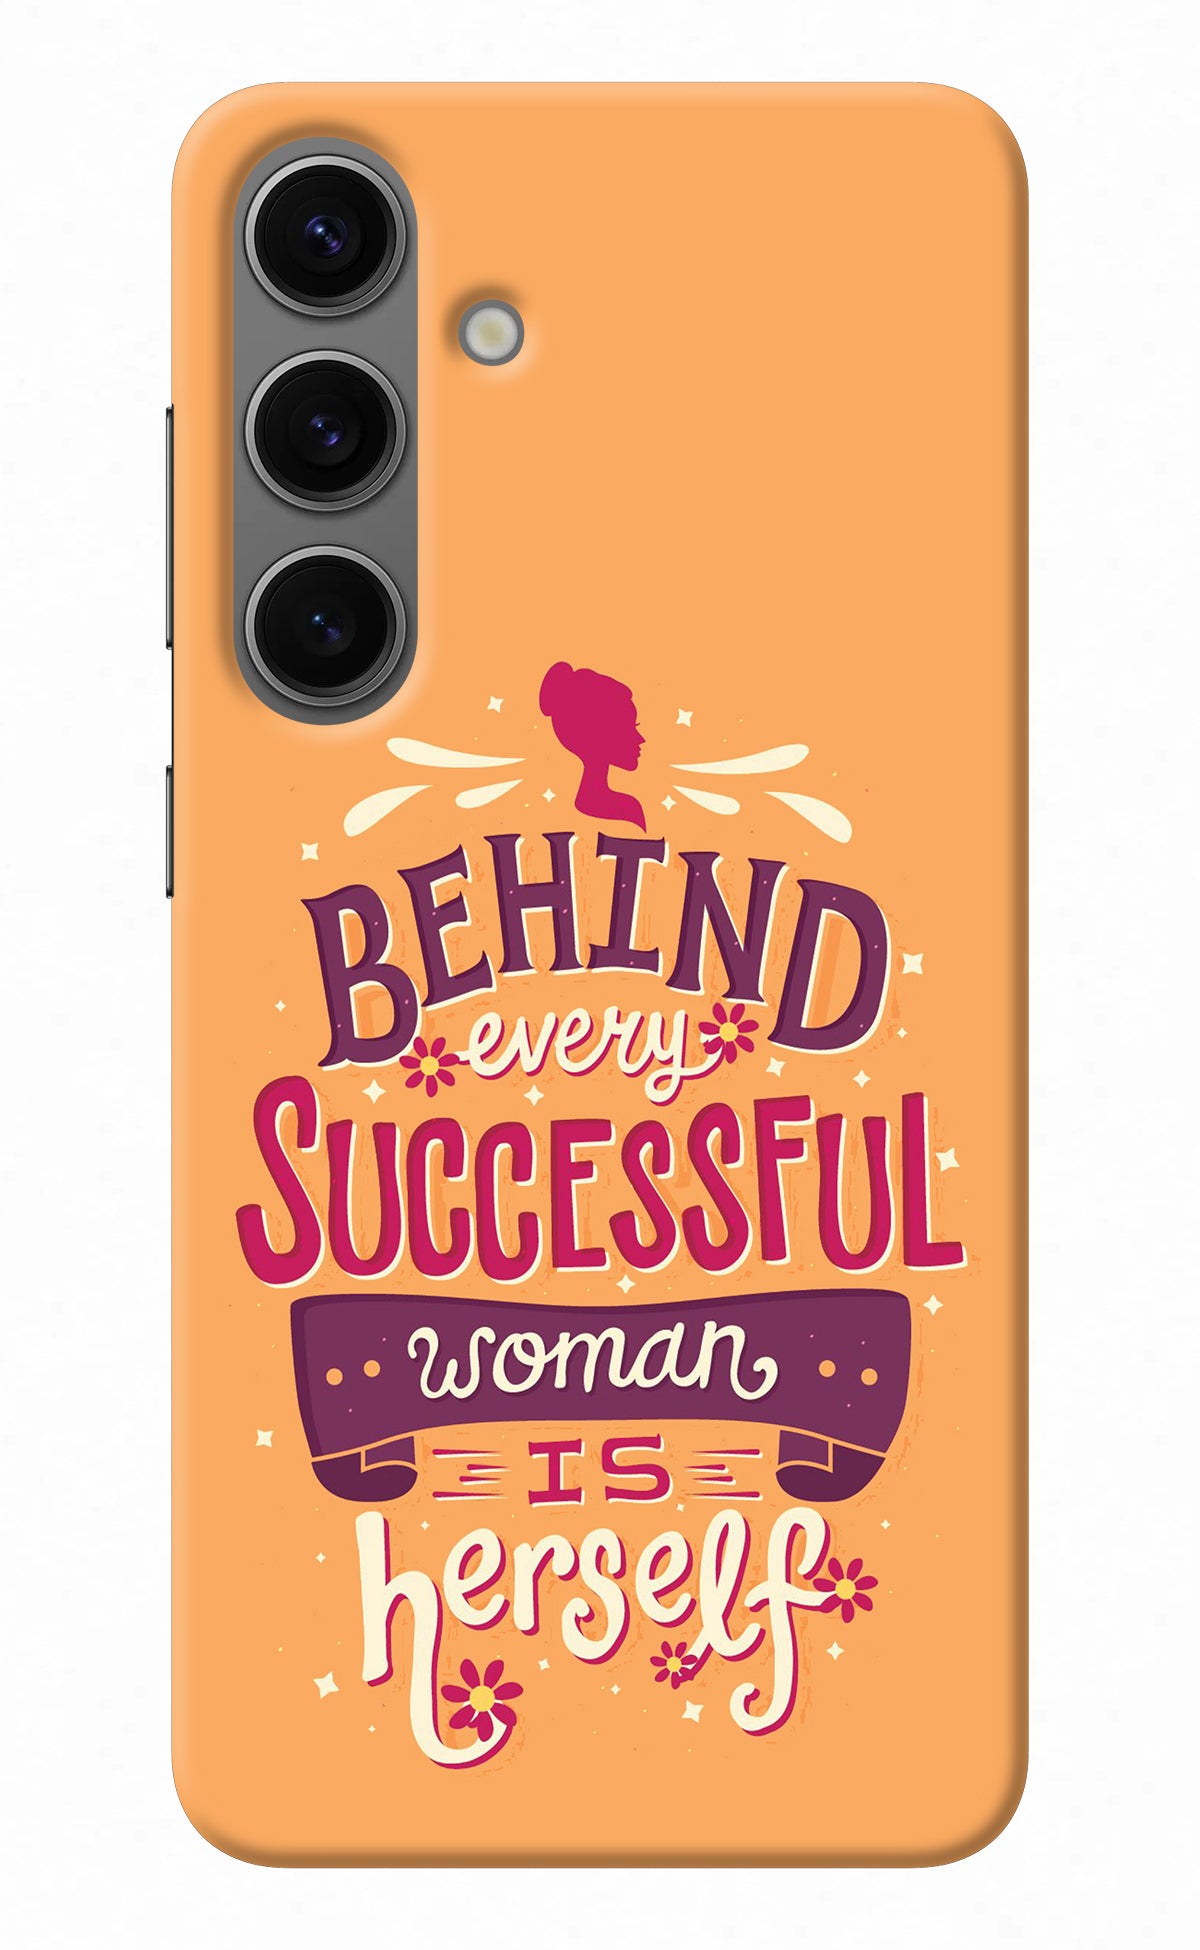 Behind Every Successful Woman There Is Herself Samsung S24 Back Cover